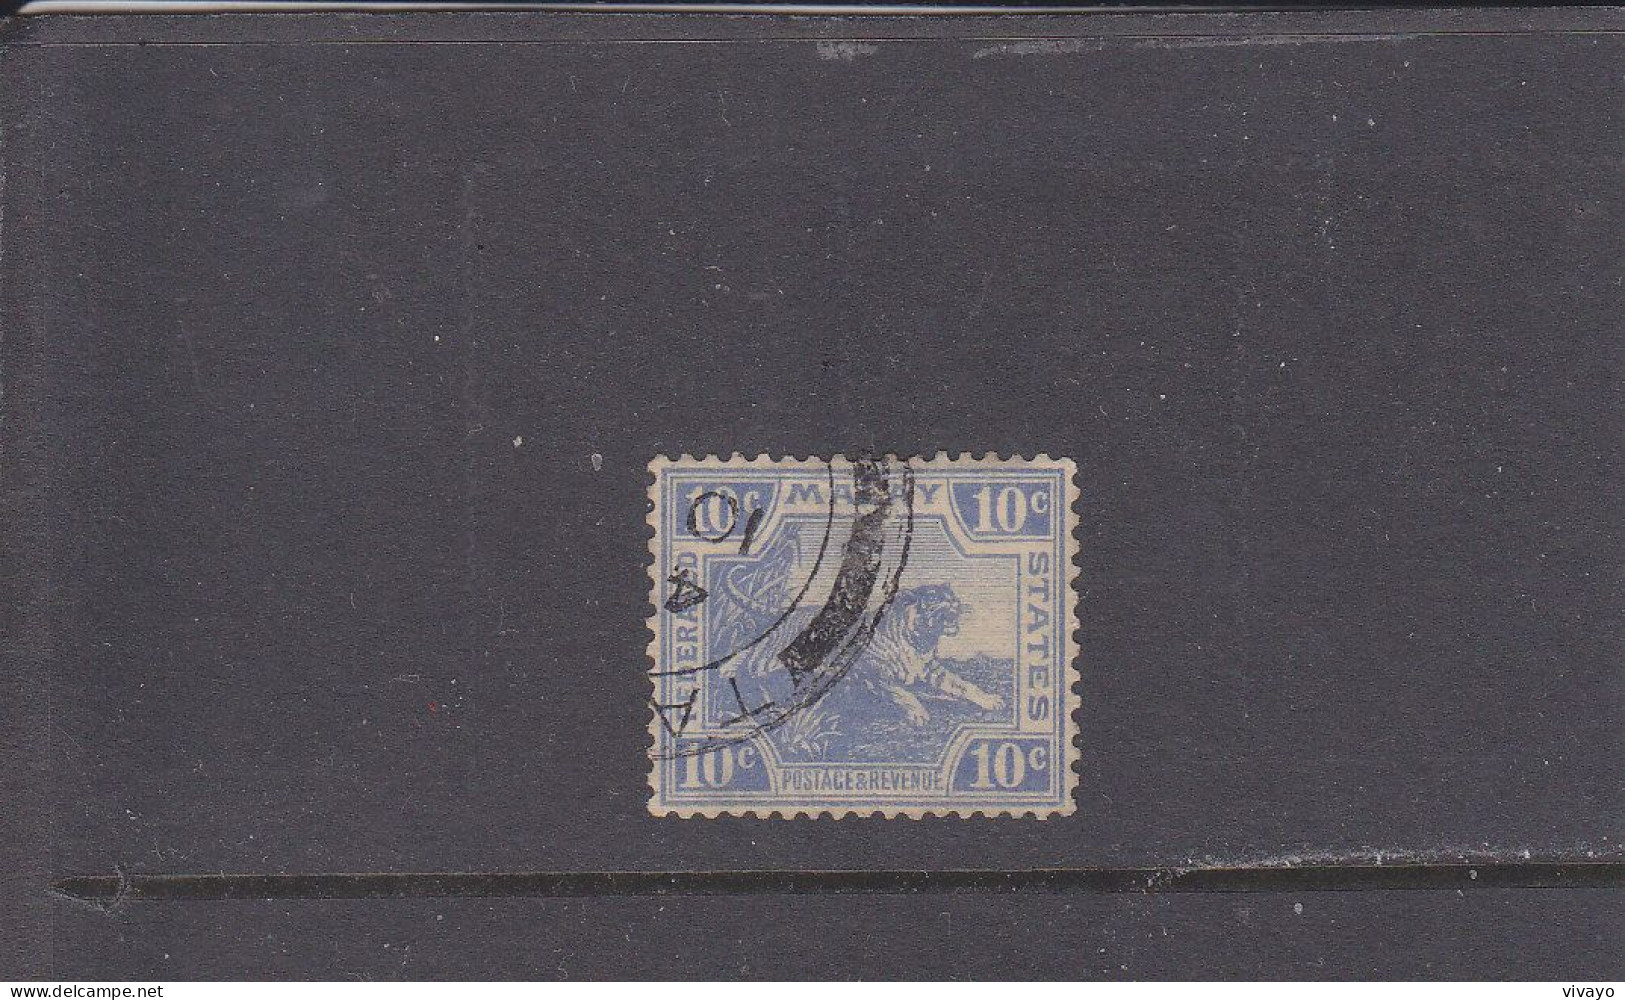 FEDERATED MALAY STATES - O / FINE CANCELLED - 1918/19 - TIGER , TIGRE - 10cts - Mi. 49 - Federated Malay States